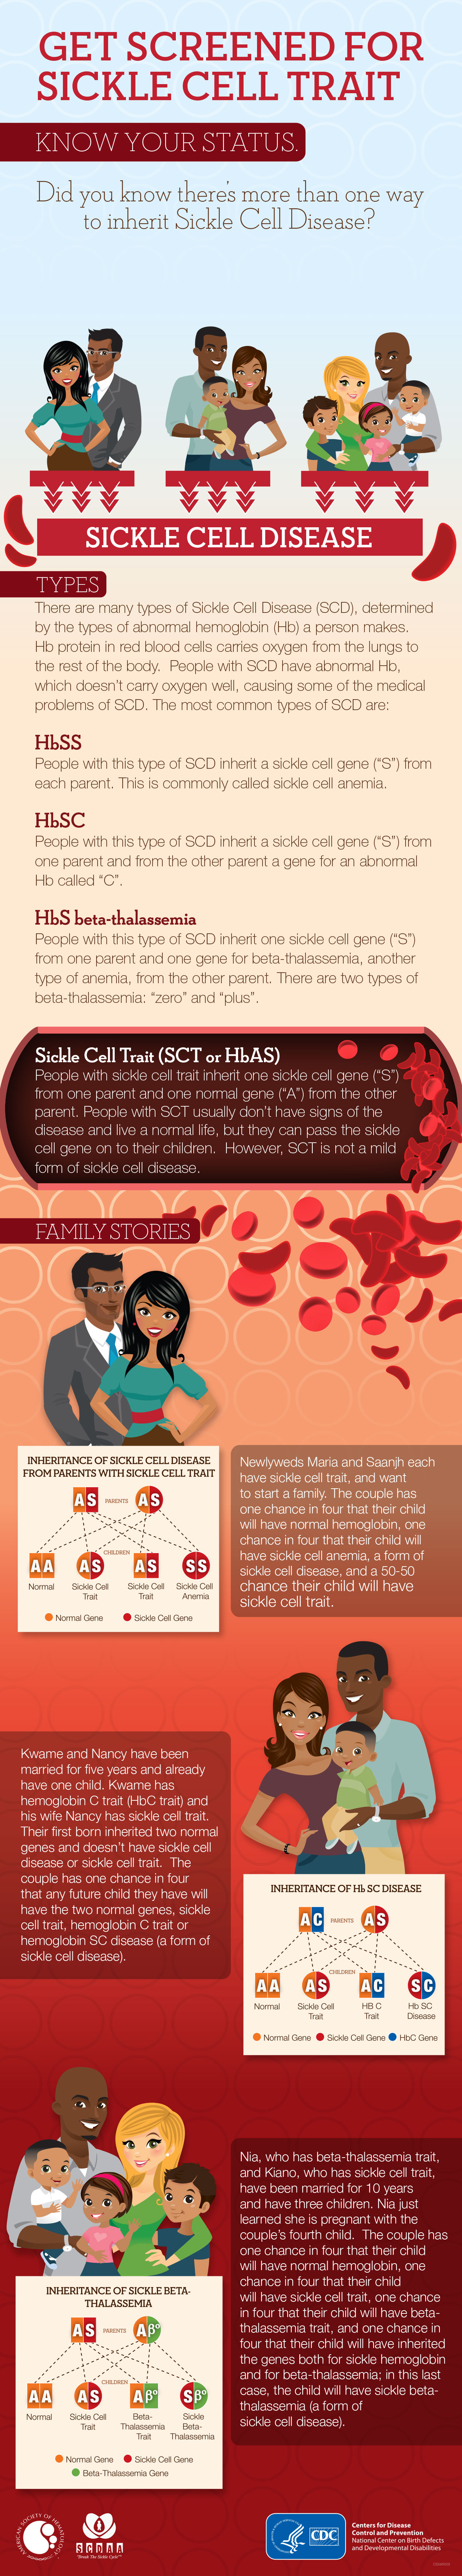 Infographic: Get screened for sickle cell trait